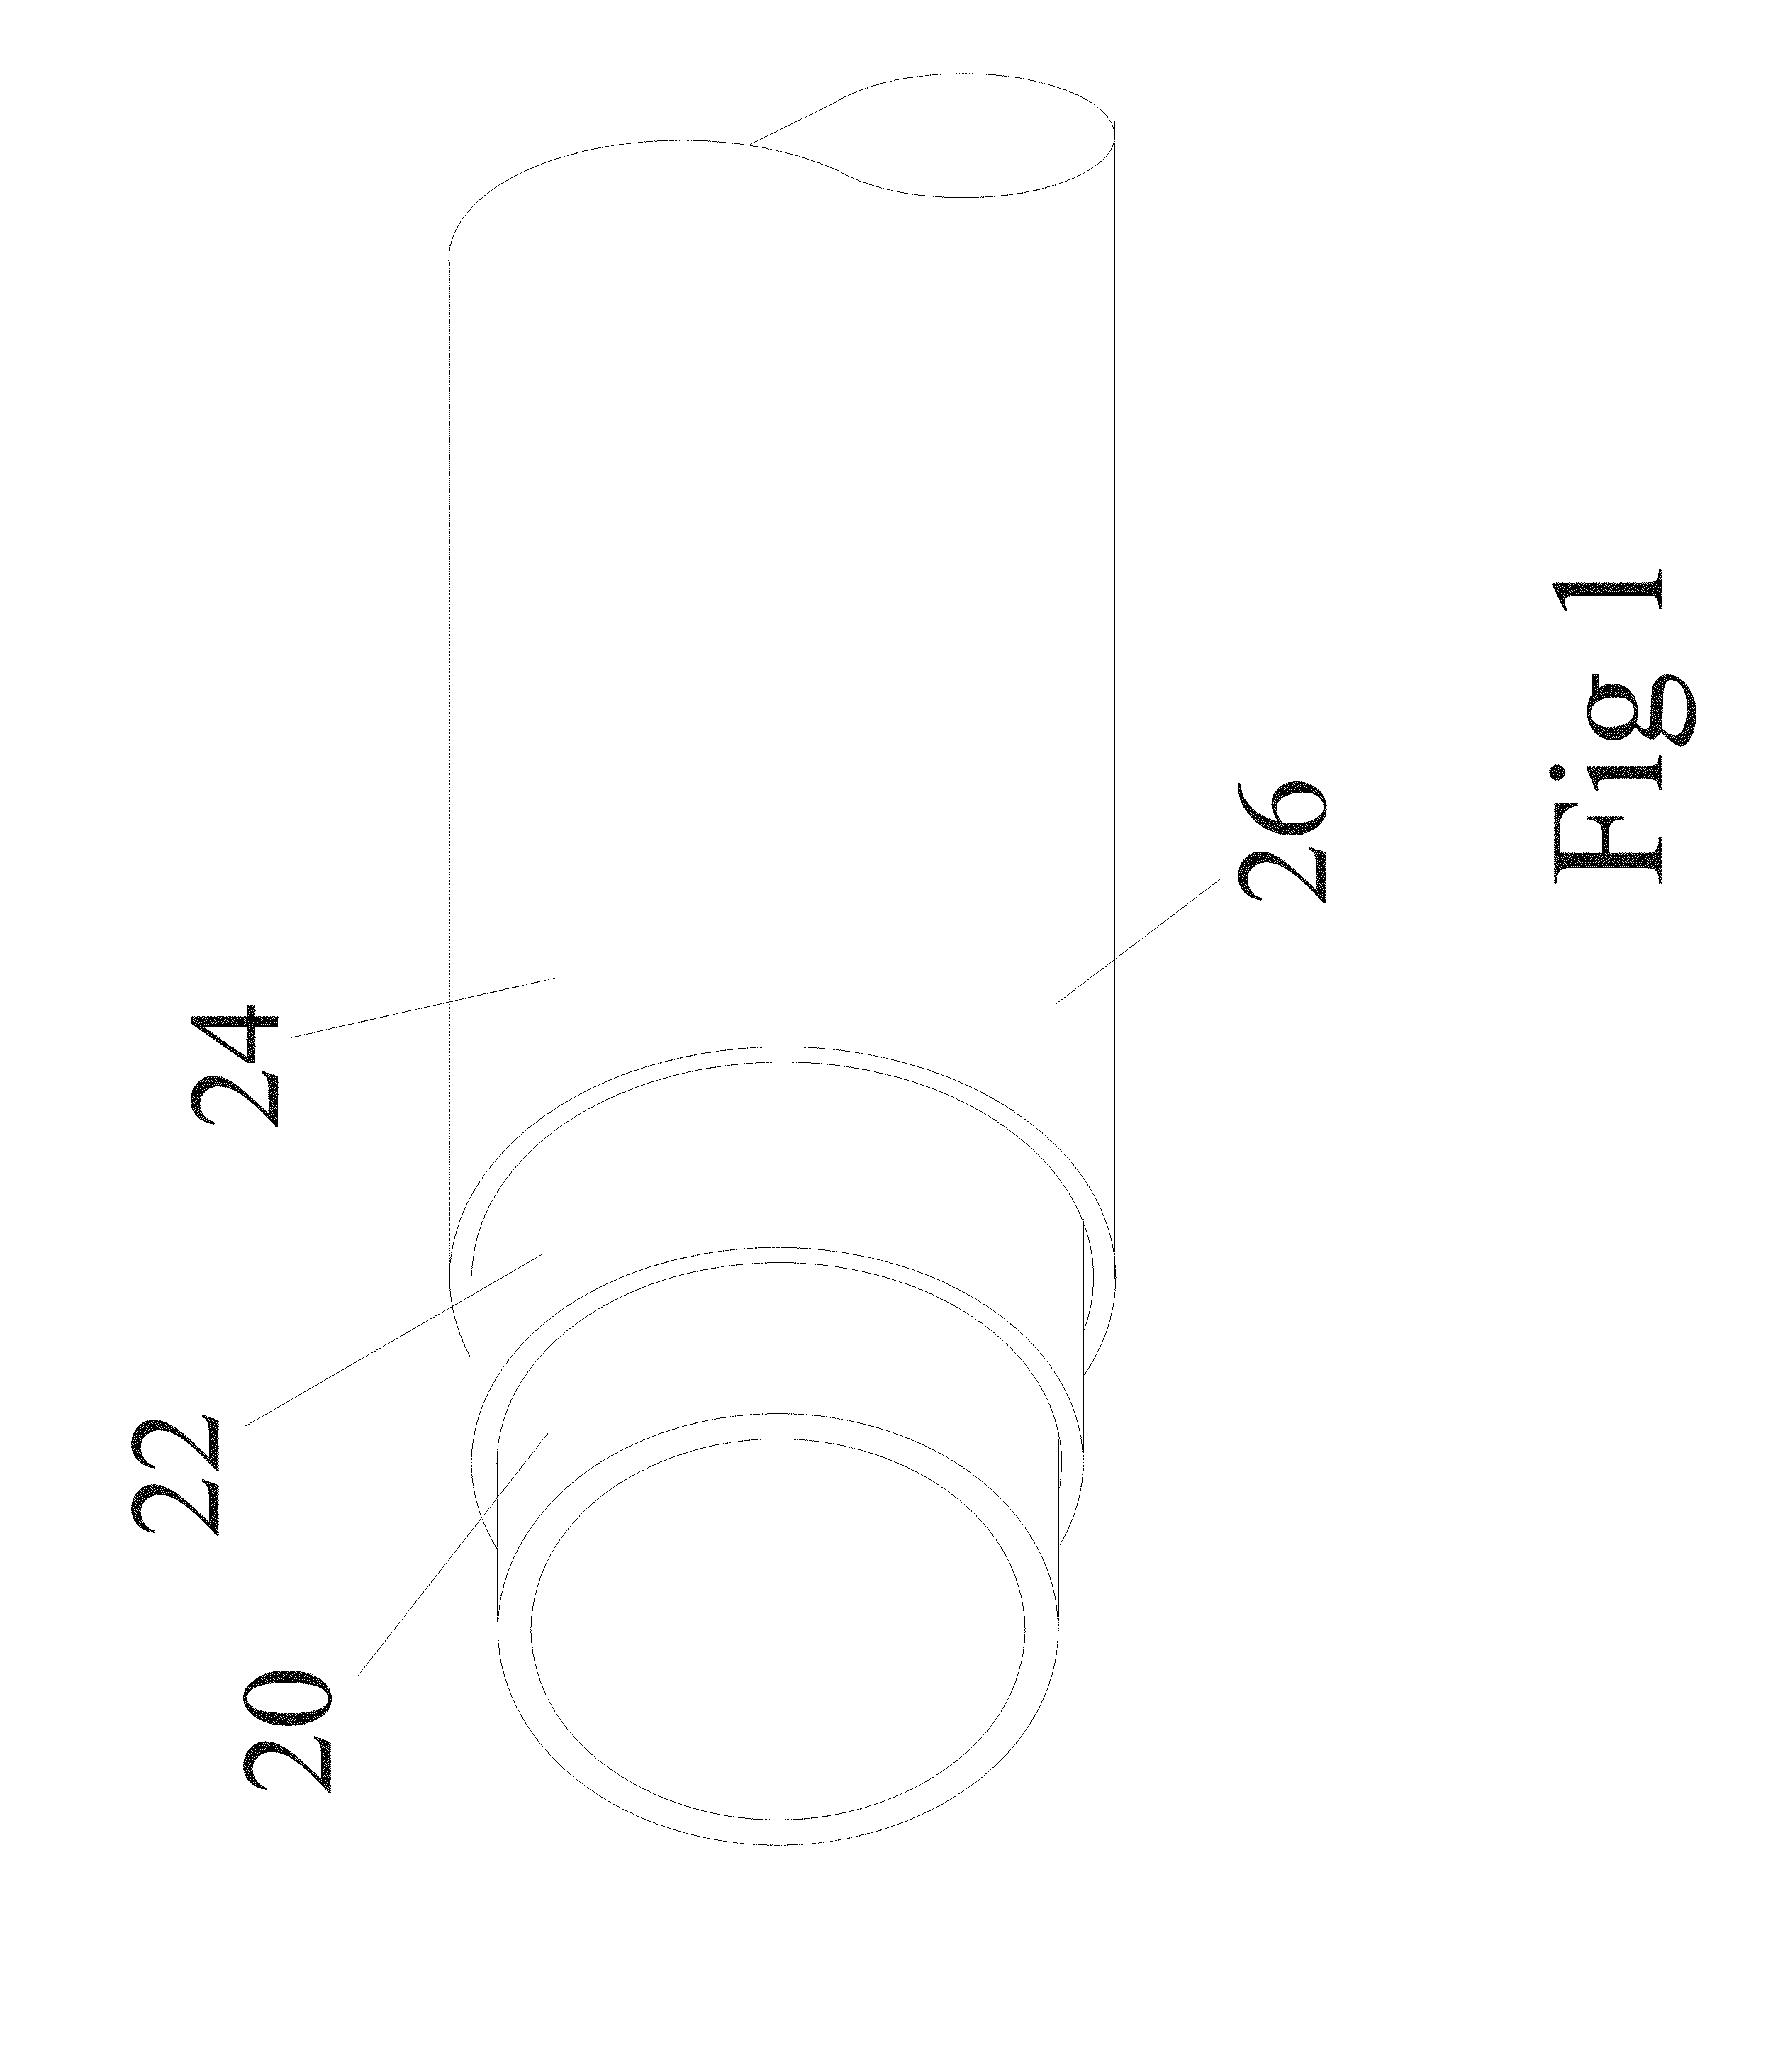 Instrumentation and Monitoring System For Pipes and Conduits Transporting Cryogenic Materials